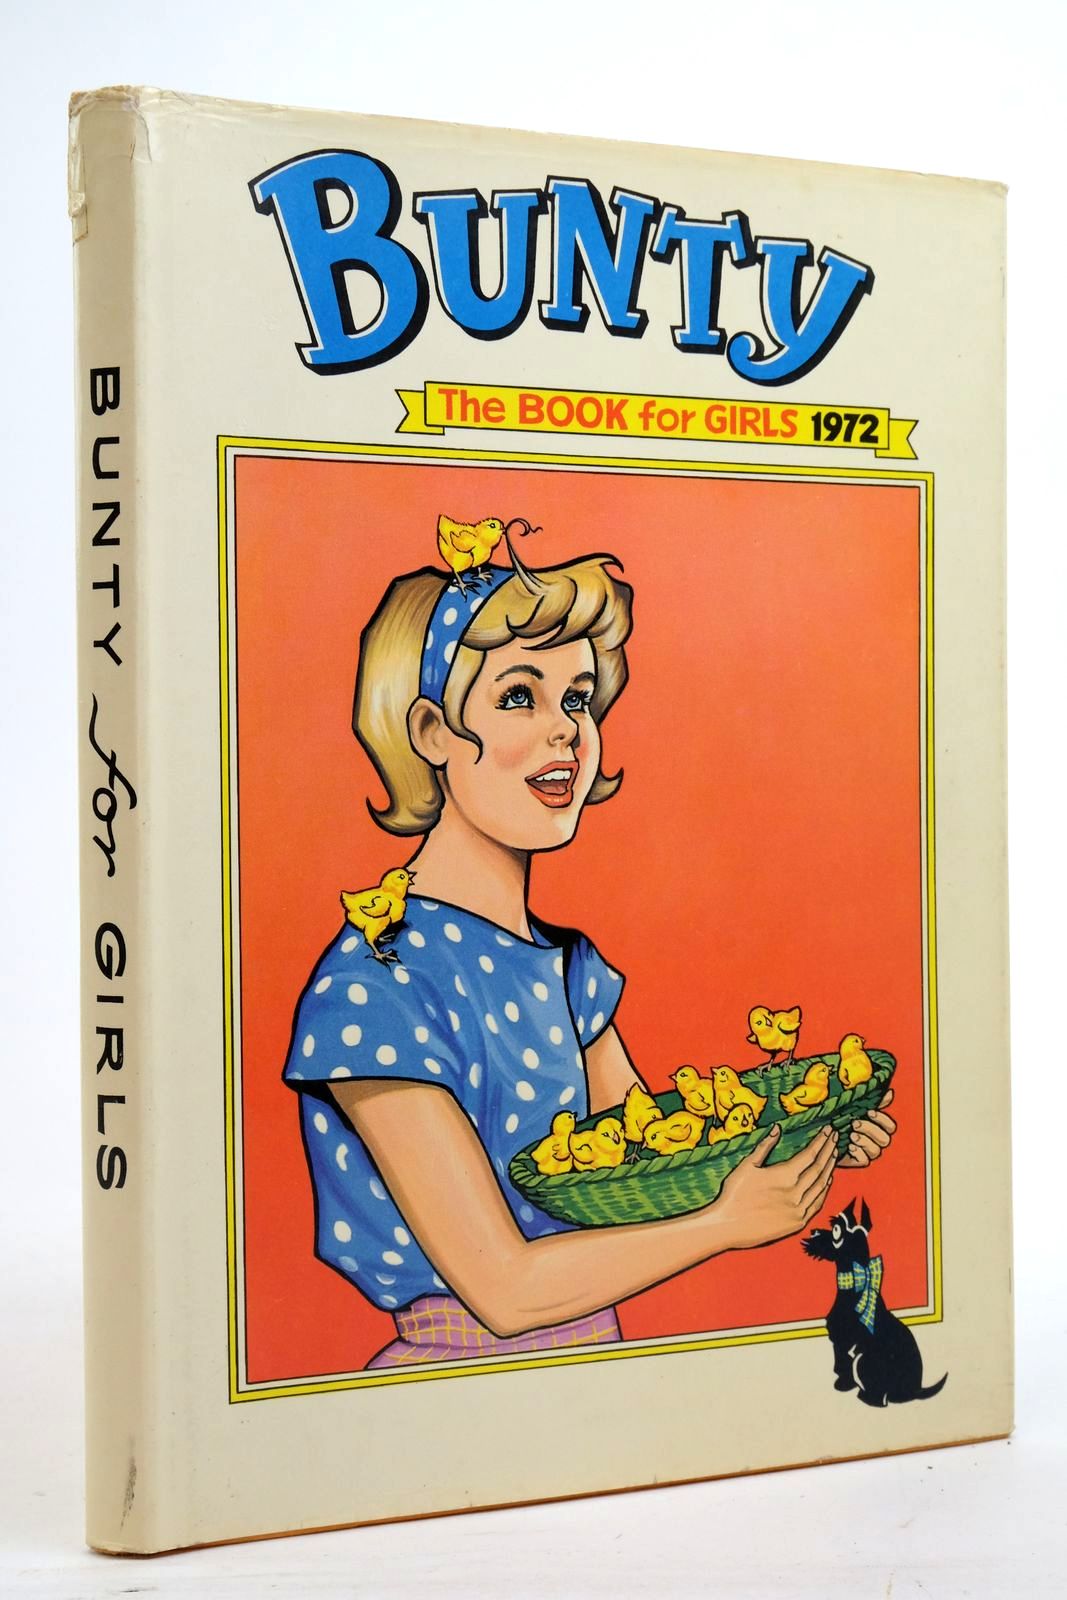 Photo of BUNTY FOR GIRLS 1972 published by D.C. Thomson & Co Ltd. (STOCK CODE: 2138027)  for sale by Stella & Rose's Books